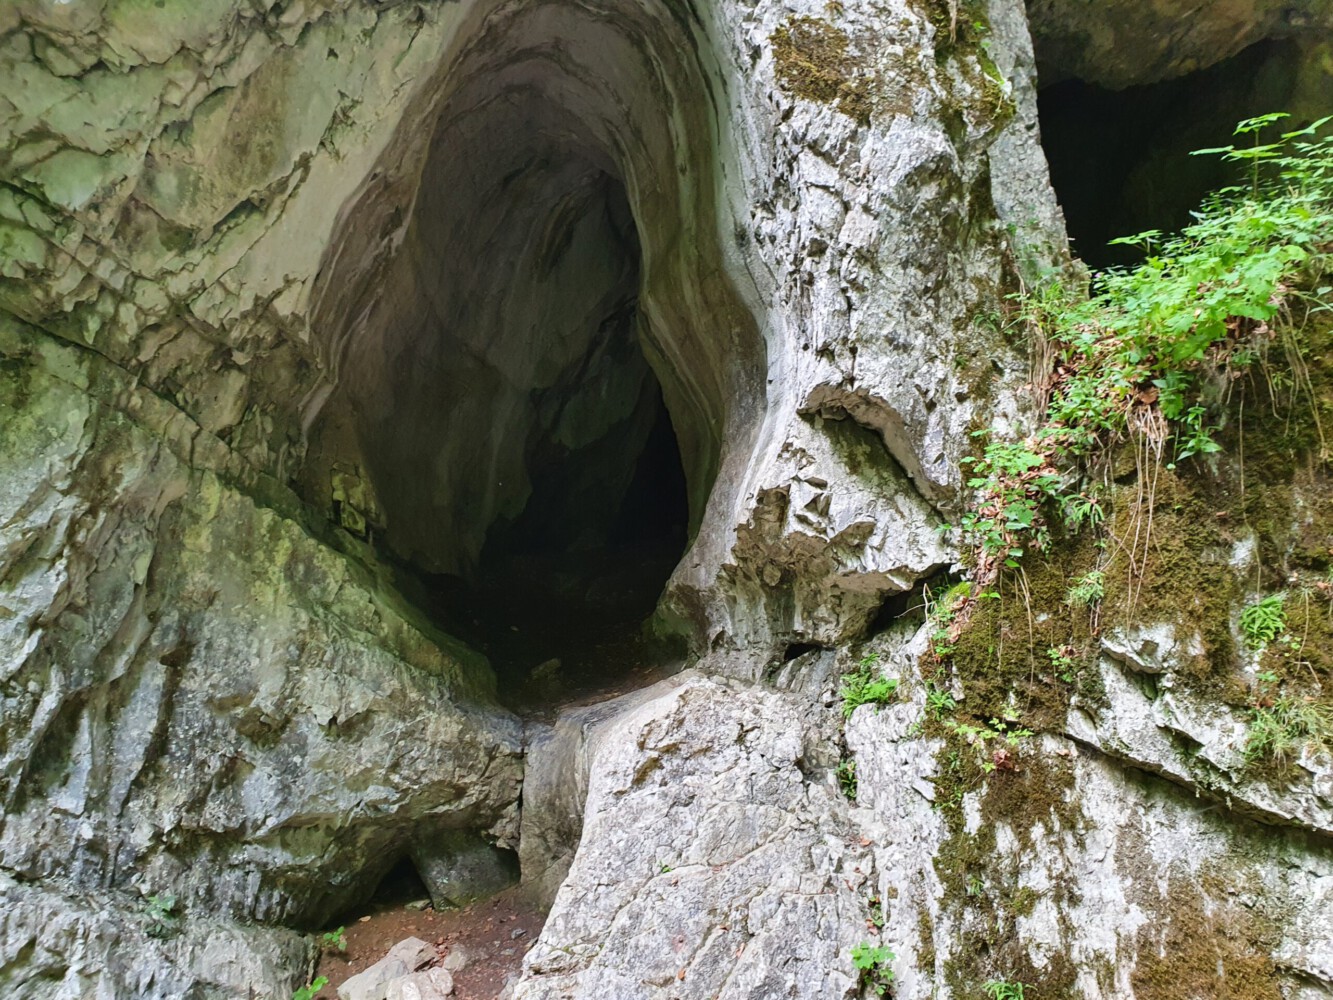 Karst caves along the way down to Brno.